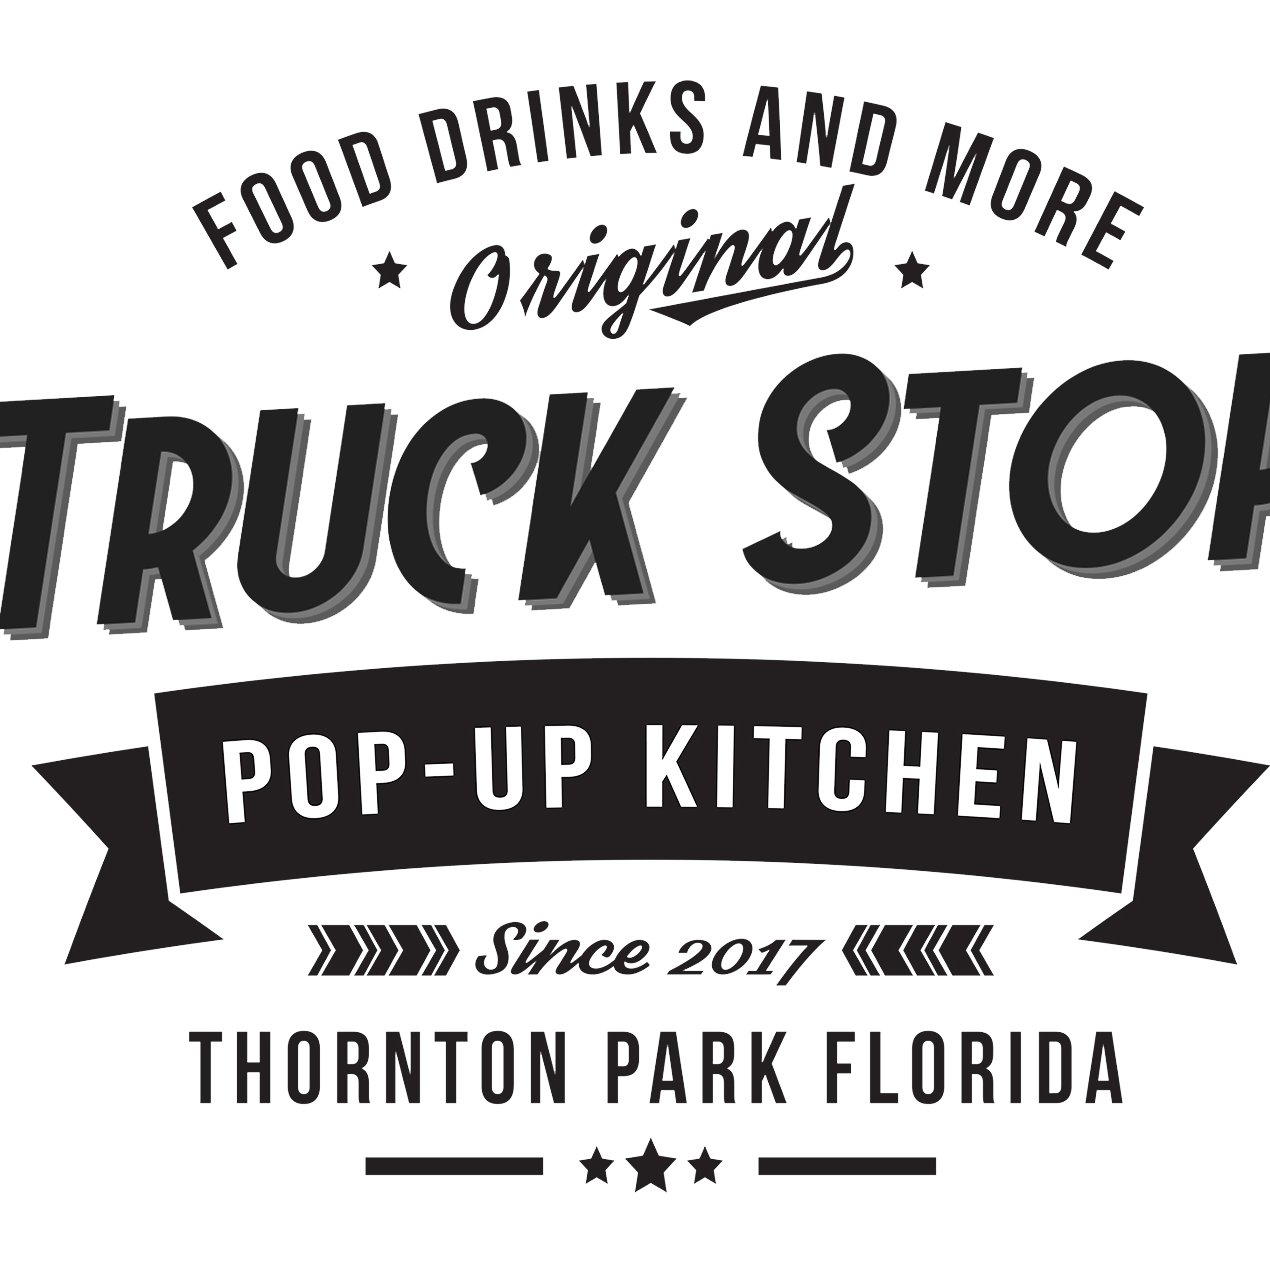 The Truck Stop is the very first permanent Pop-Up Kitchen in Florida. It’s the first of its kind in Central Florida.